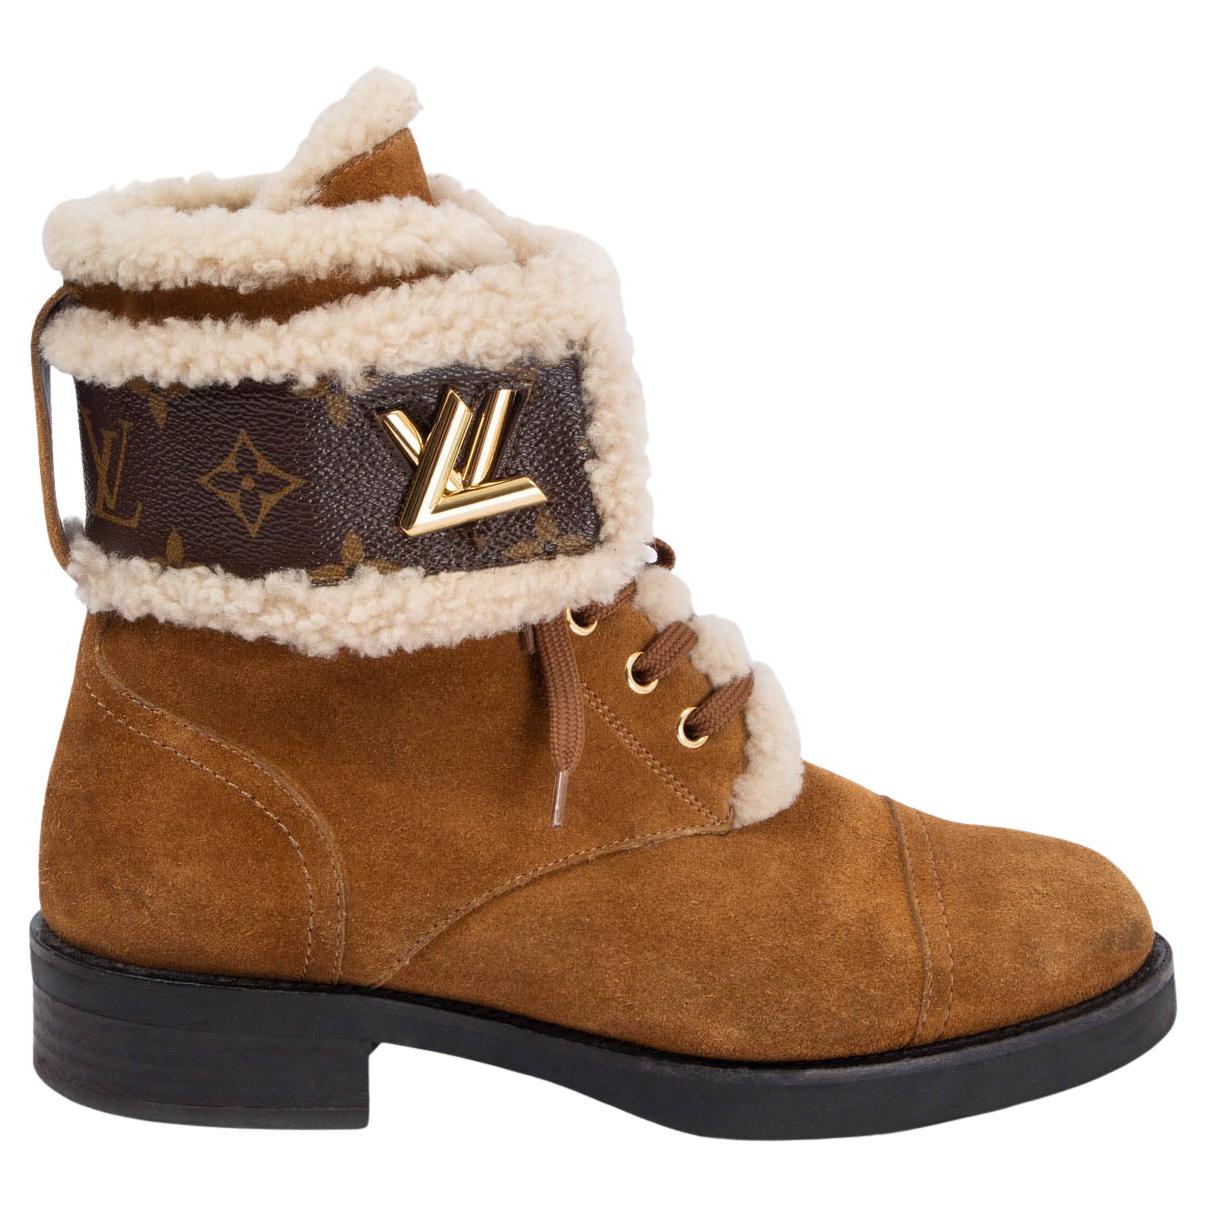 Louis Vuitton Boots Brown Size 6.5 - $1000 (22% Off Retail) - From Lauren